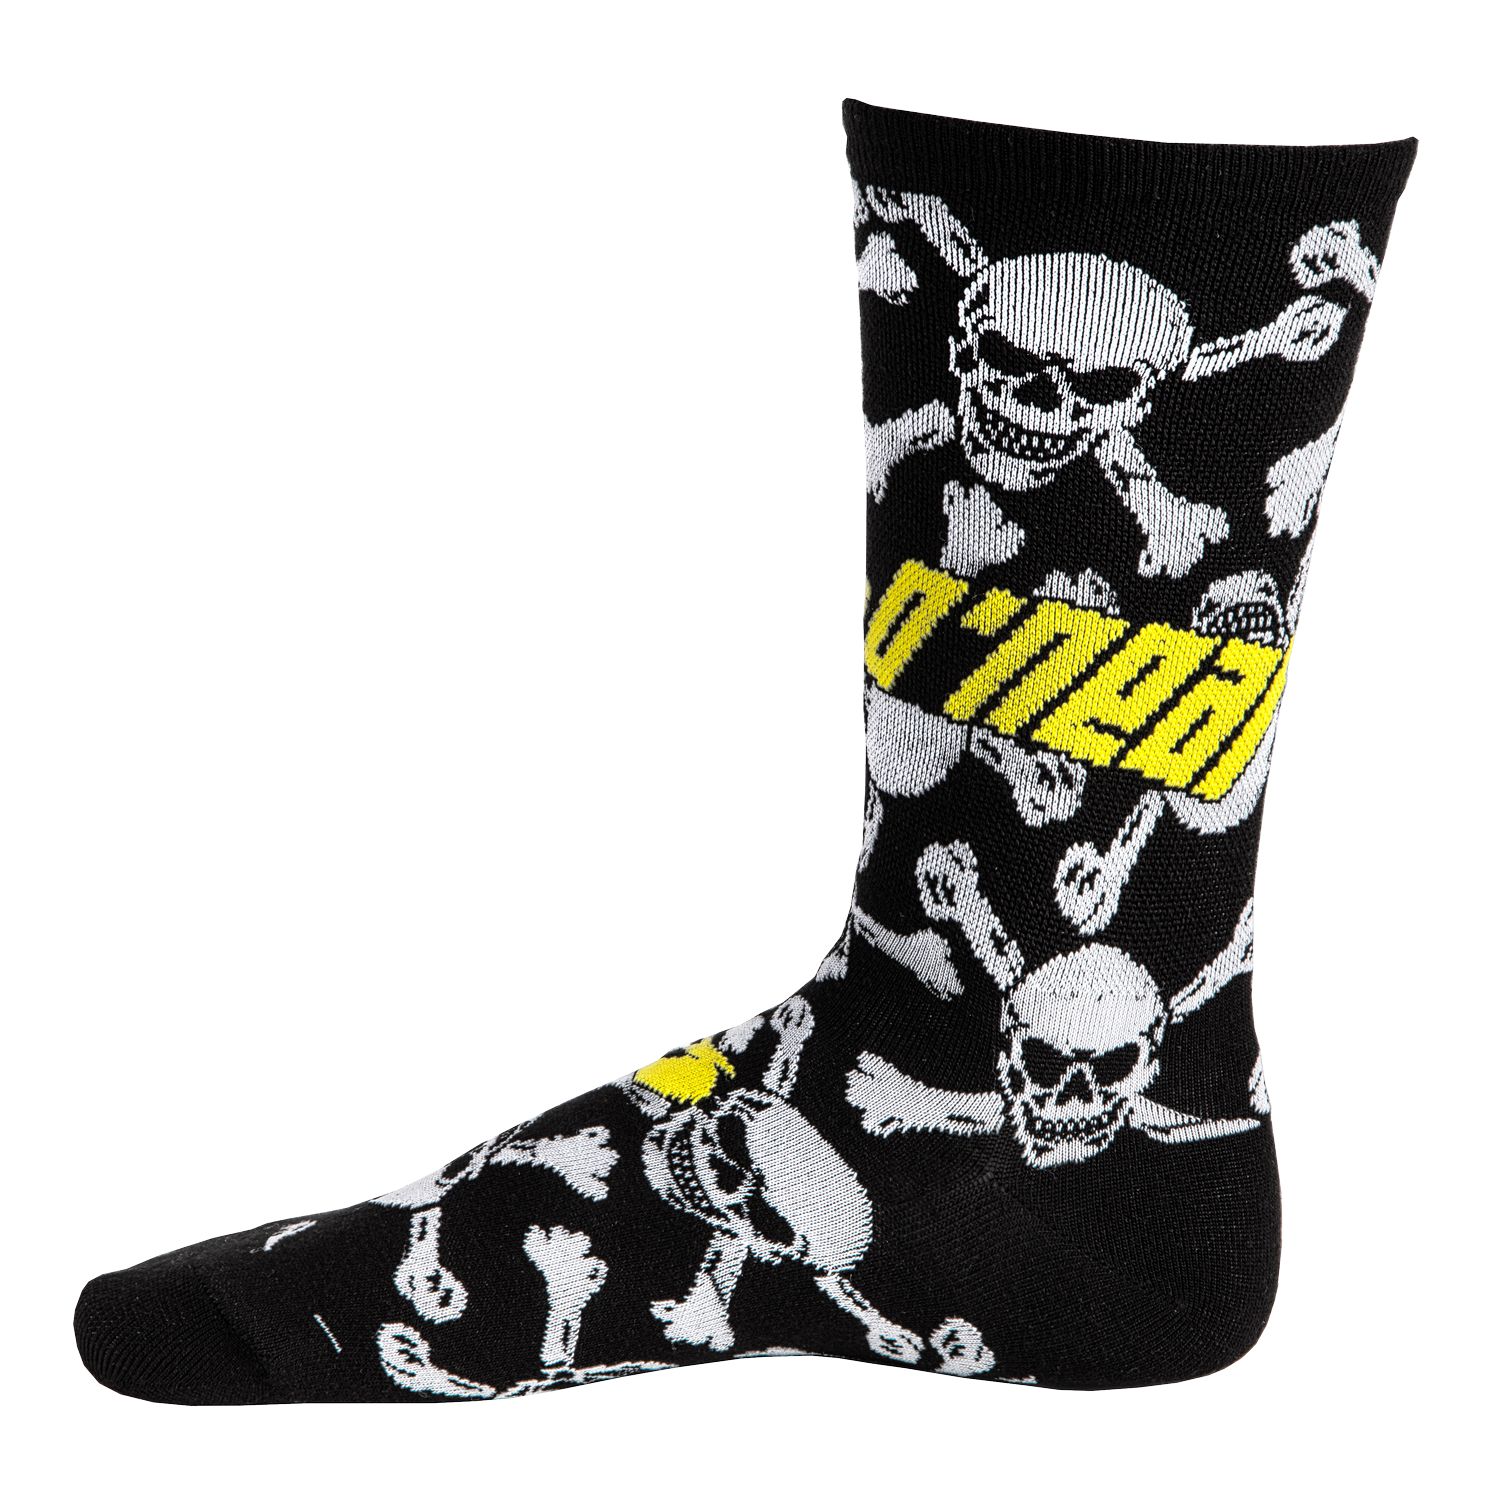 Image of Chaussettes MX O'Neal CREW - CROSSBONES - MULTICOLORE